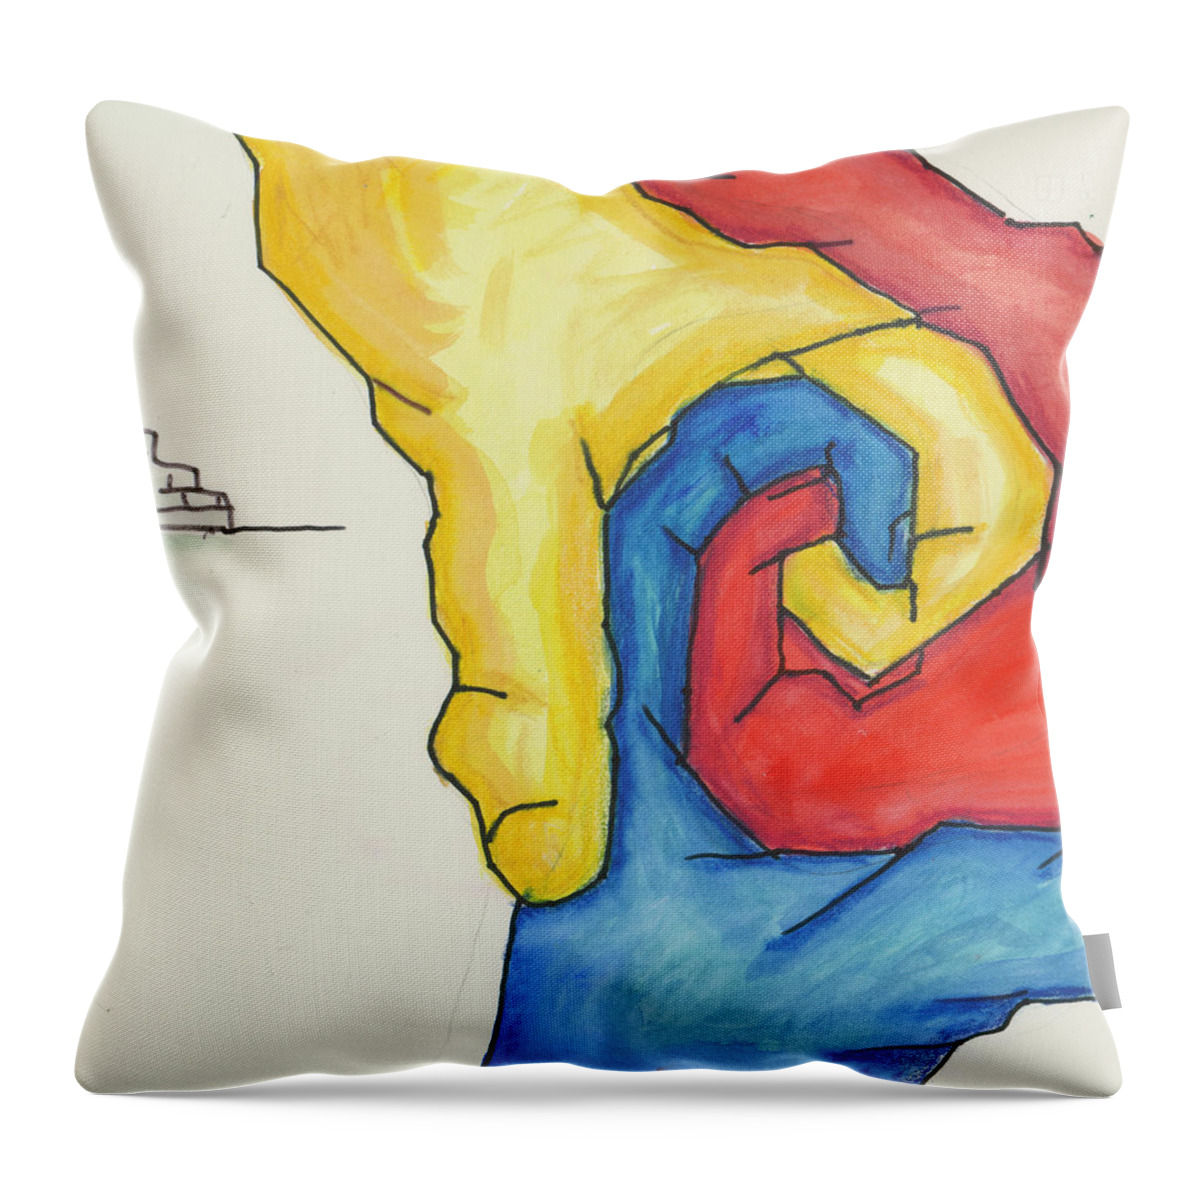 Bible Throw Pillow featuring the painting Esra Jeremias - THE WIEDMANN BIBLE page 43 by Willy Wiedmann